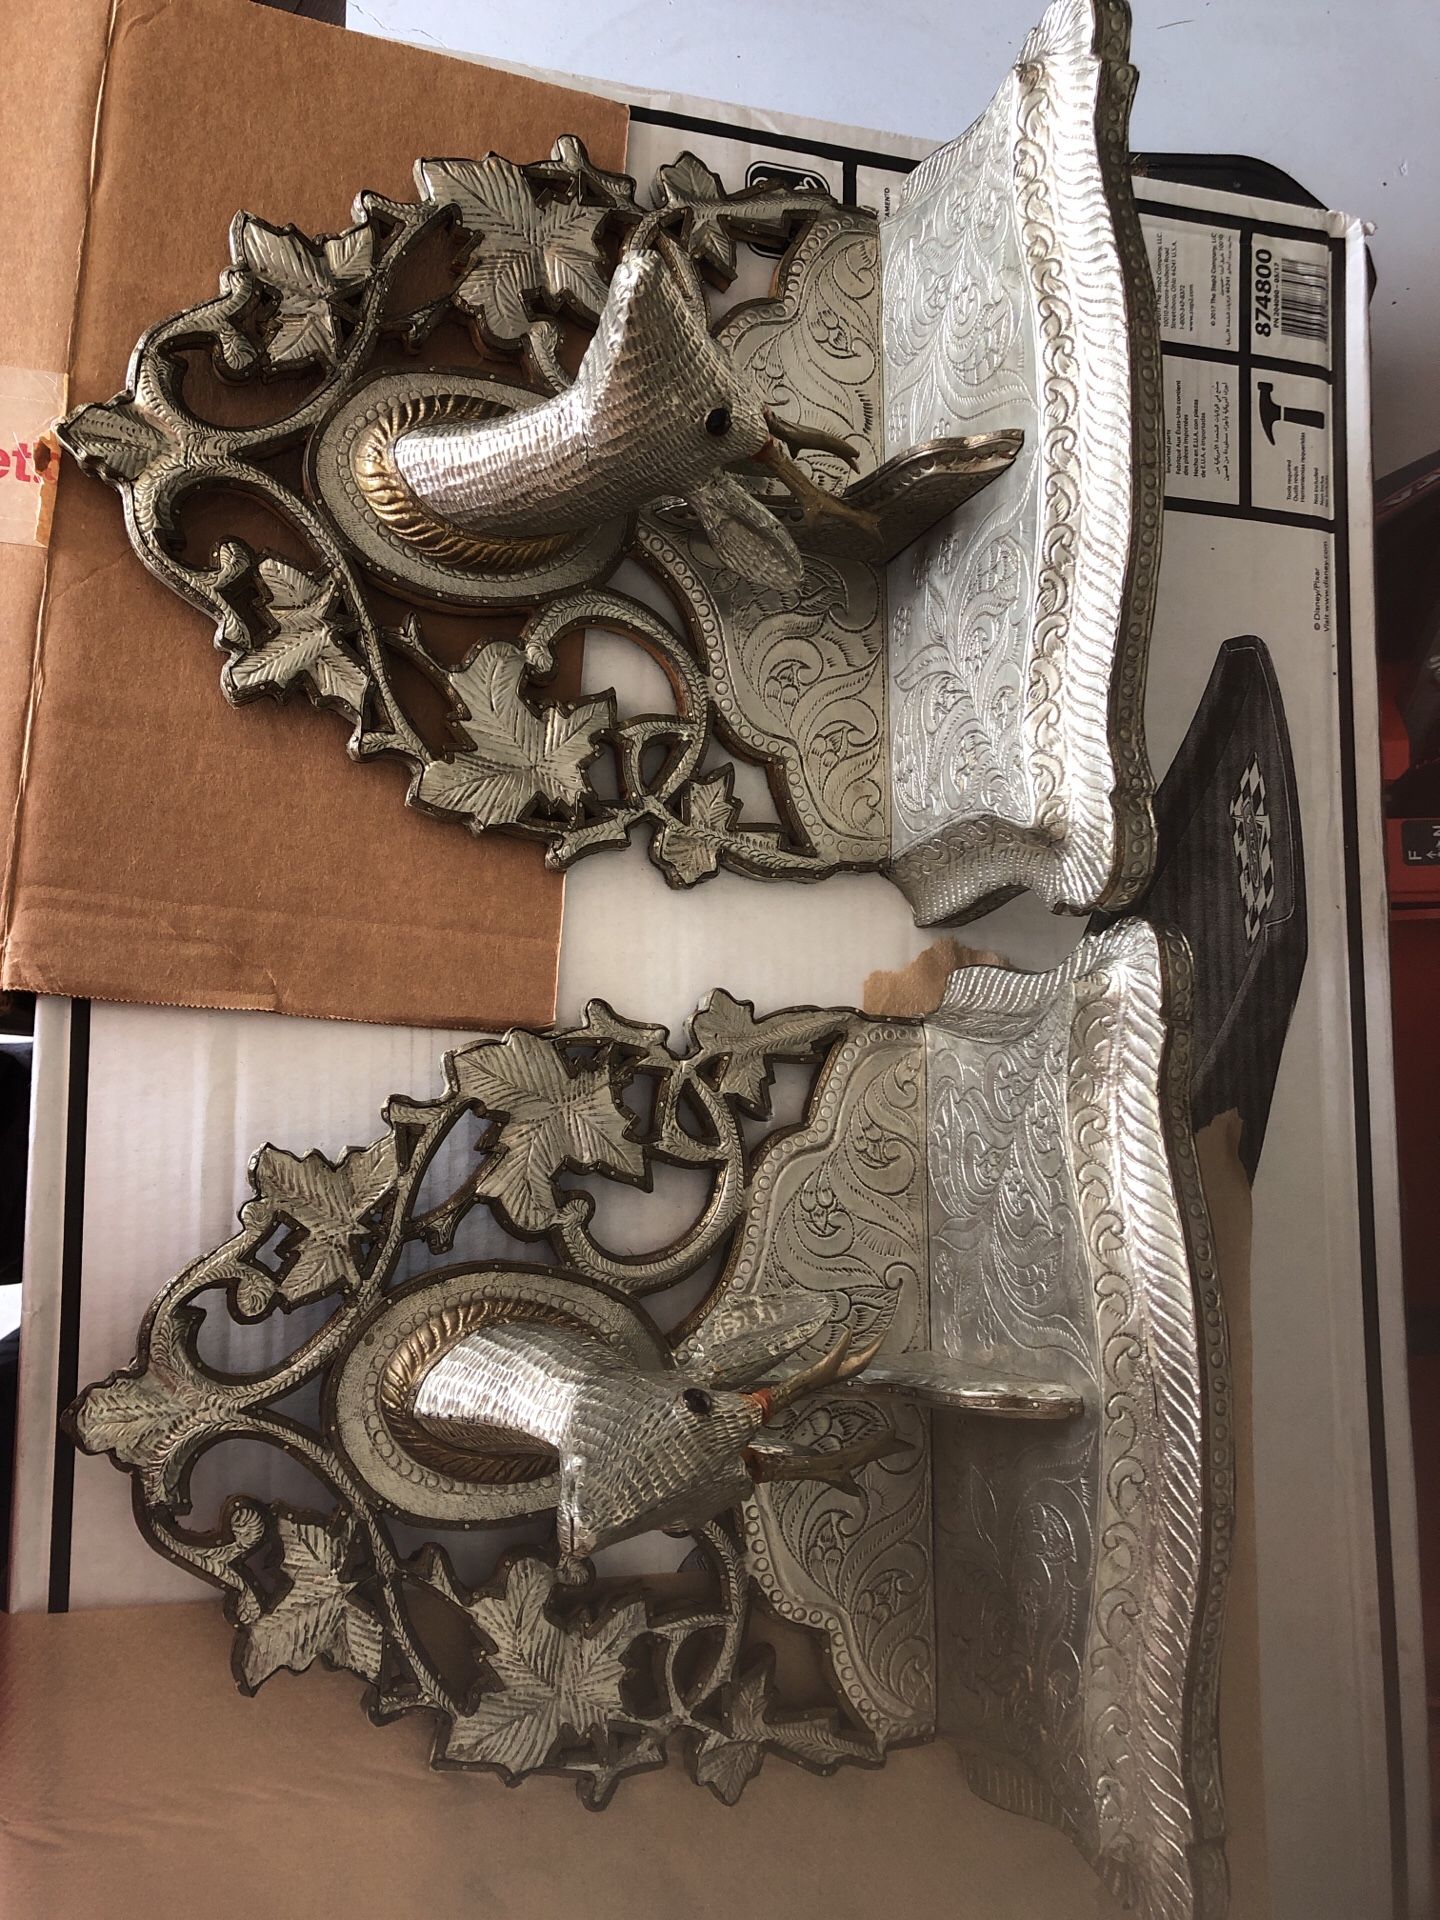 Ornate silver and pewter wall hanging shelves